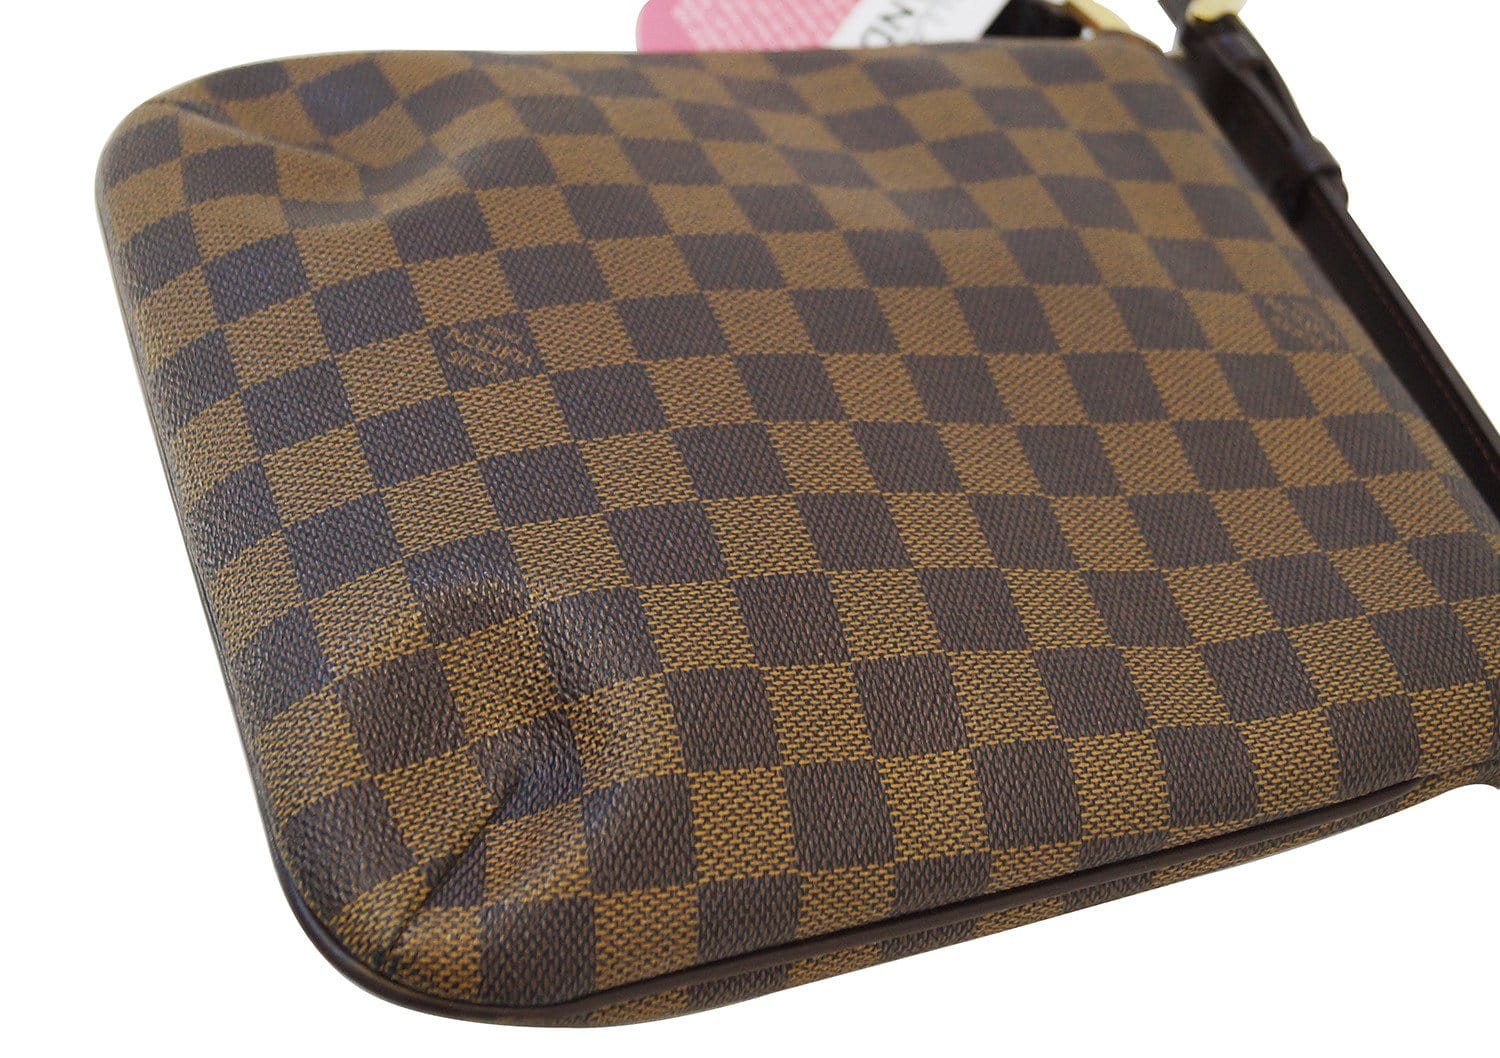 How to Wear: Louis Vuitton Damier Musette Salsa Bag #AnhsStyle